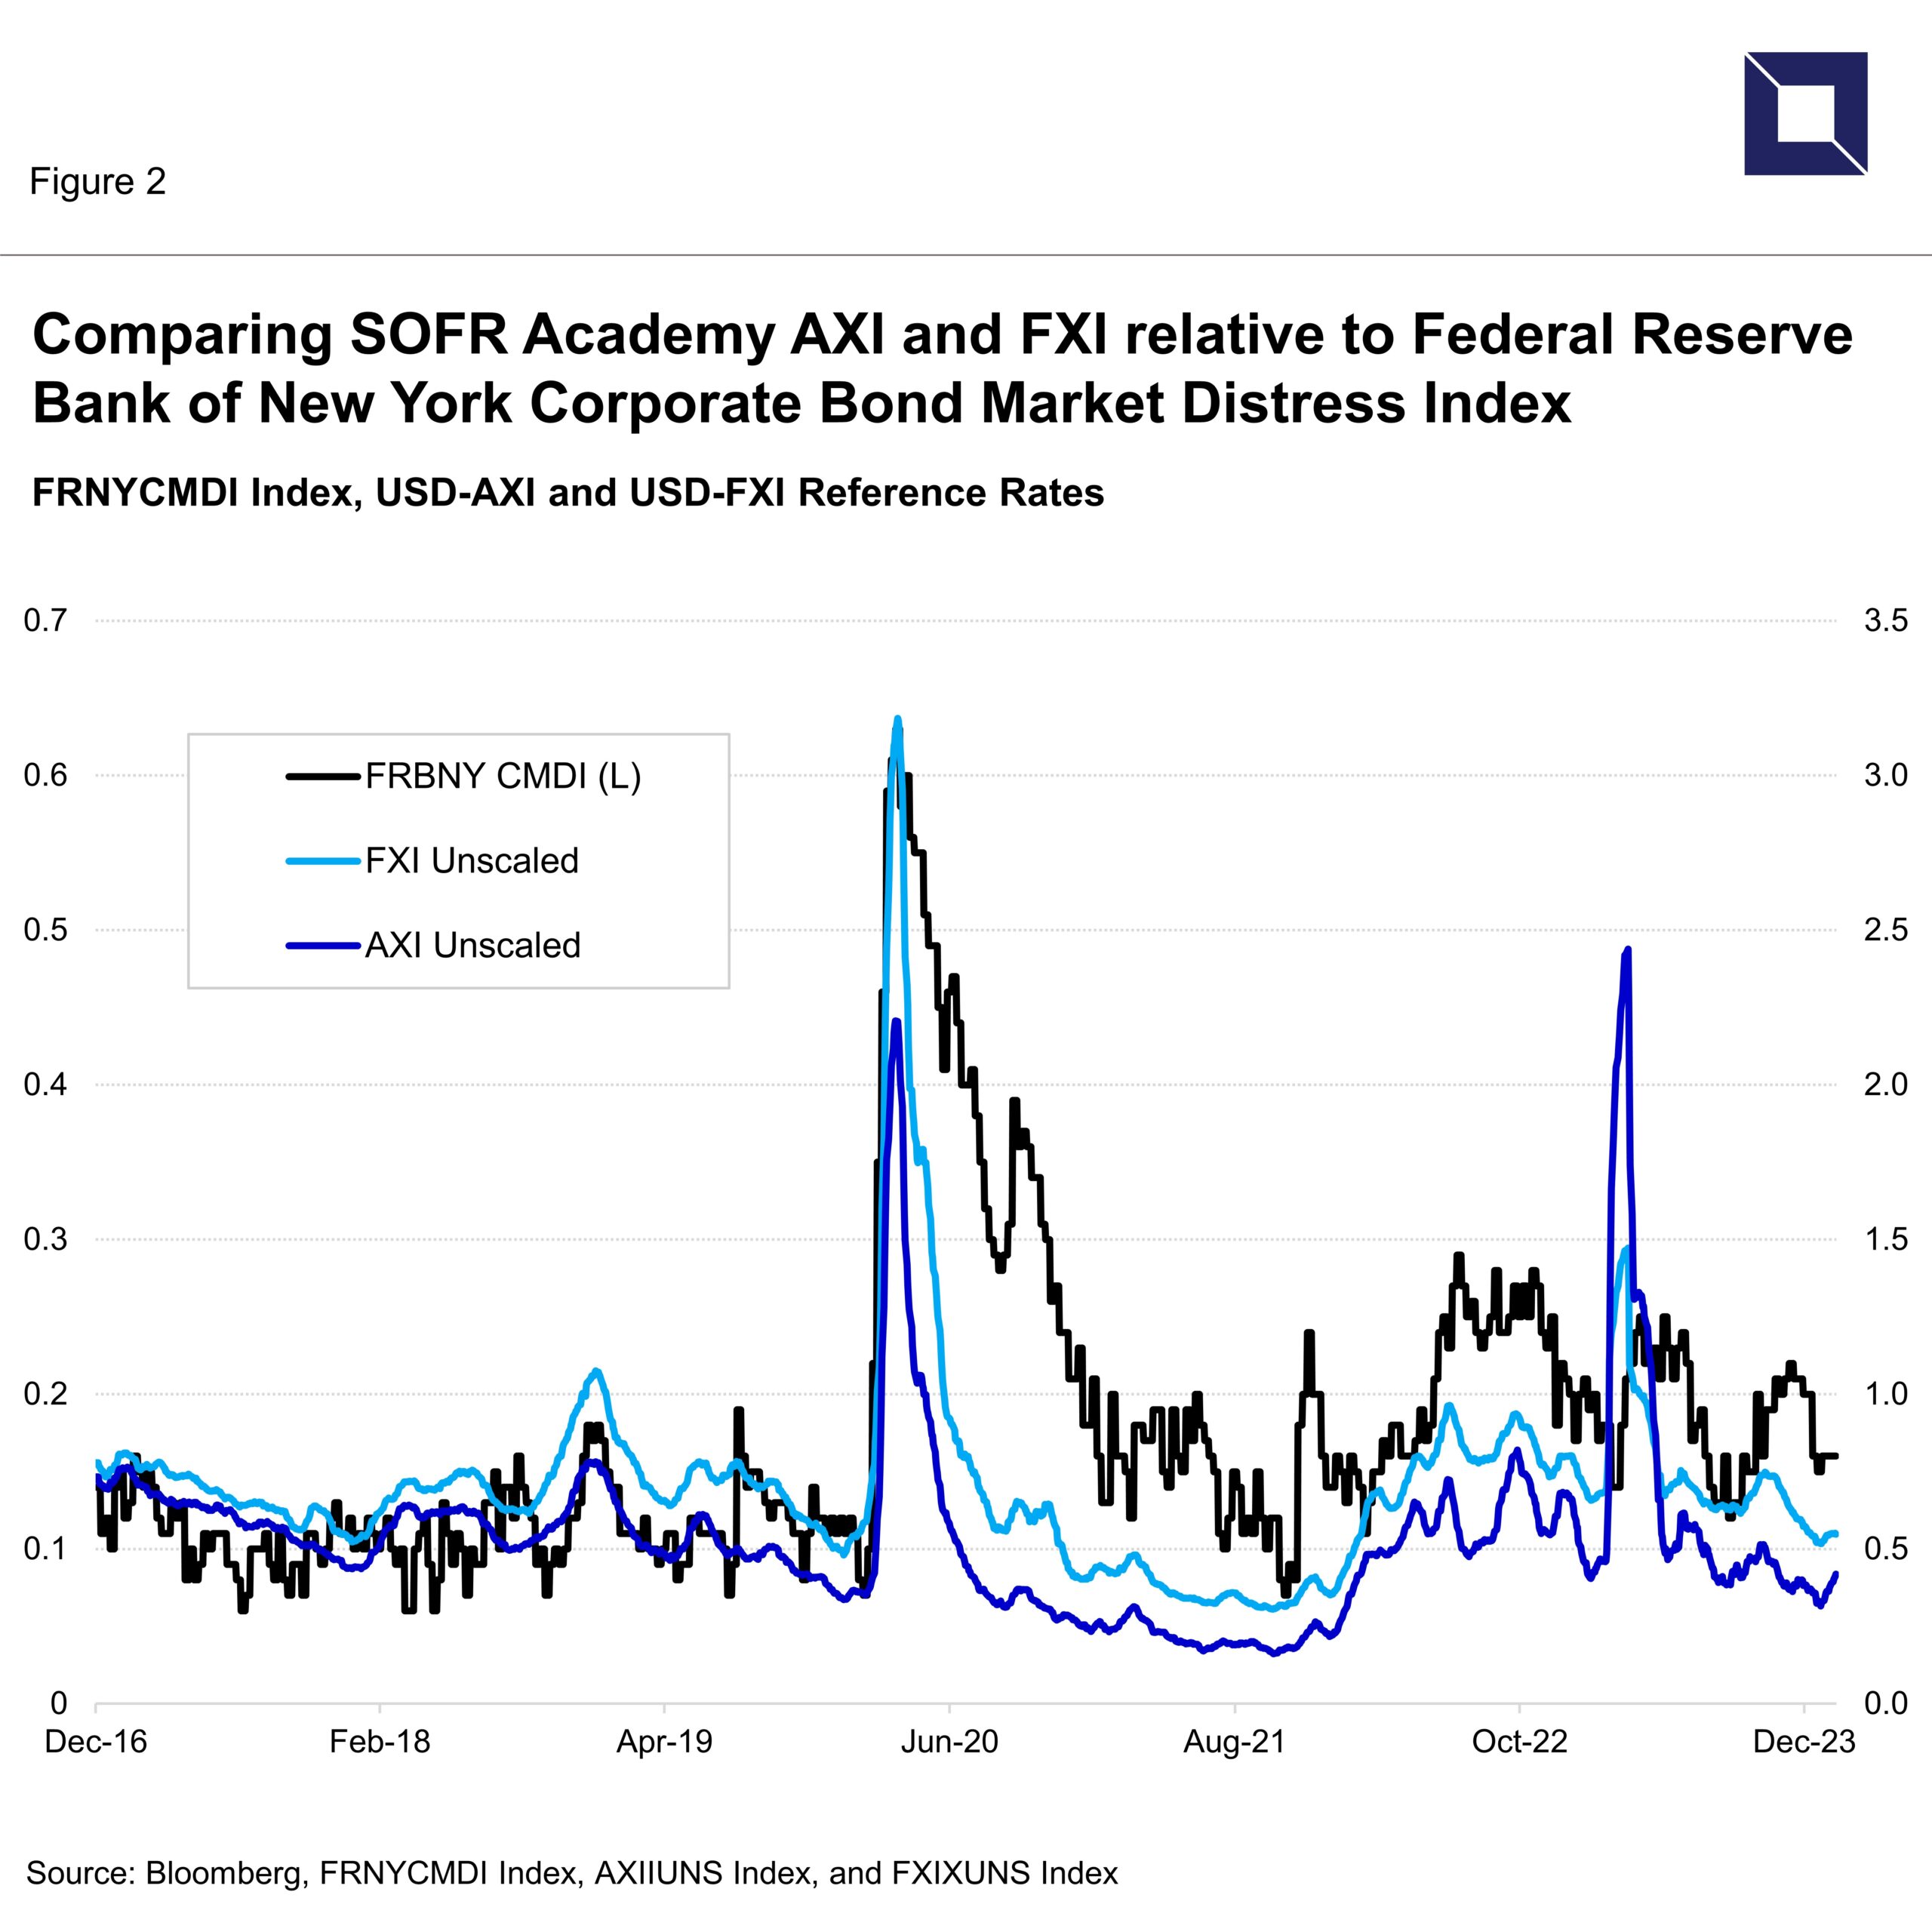 Comparing SOFR Academy AXI and FXI relative to Federal Reserve Bank of New York Corporate Bond Market Distress Index (source: Bloomberg as of 2/19/24, FRNYCMDI Index, AXIIUNS Index, and FXIXUNS Index).